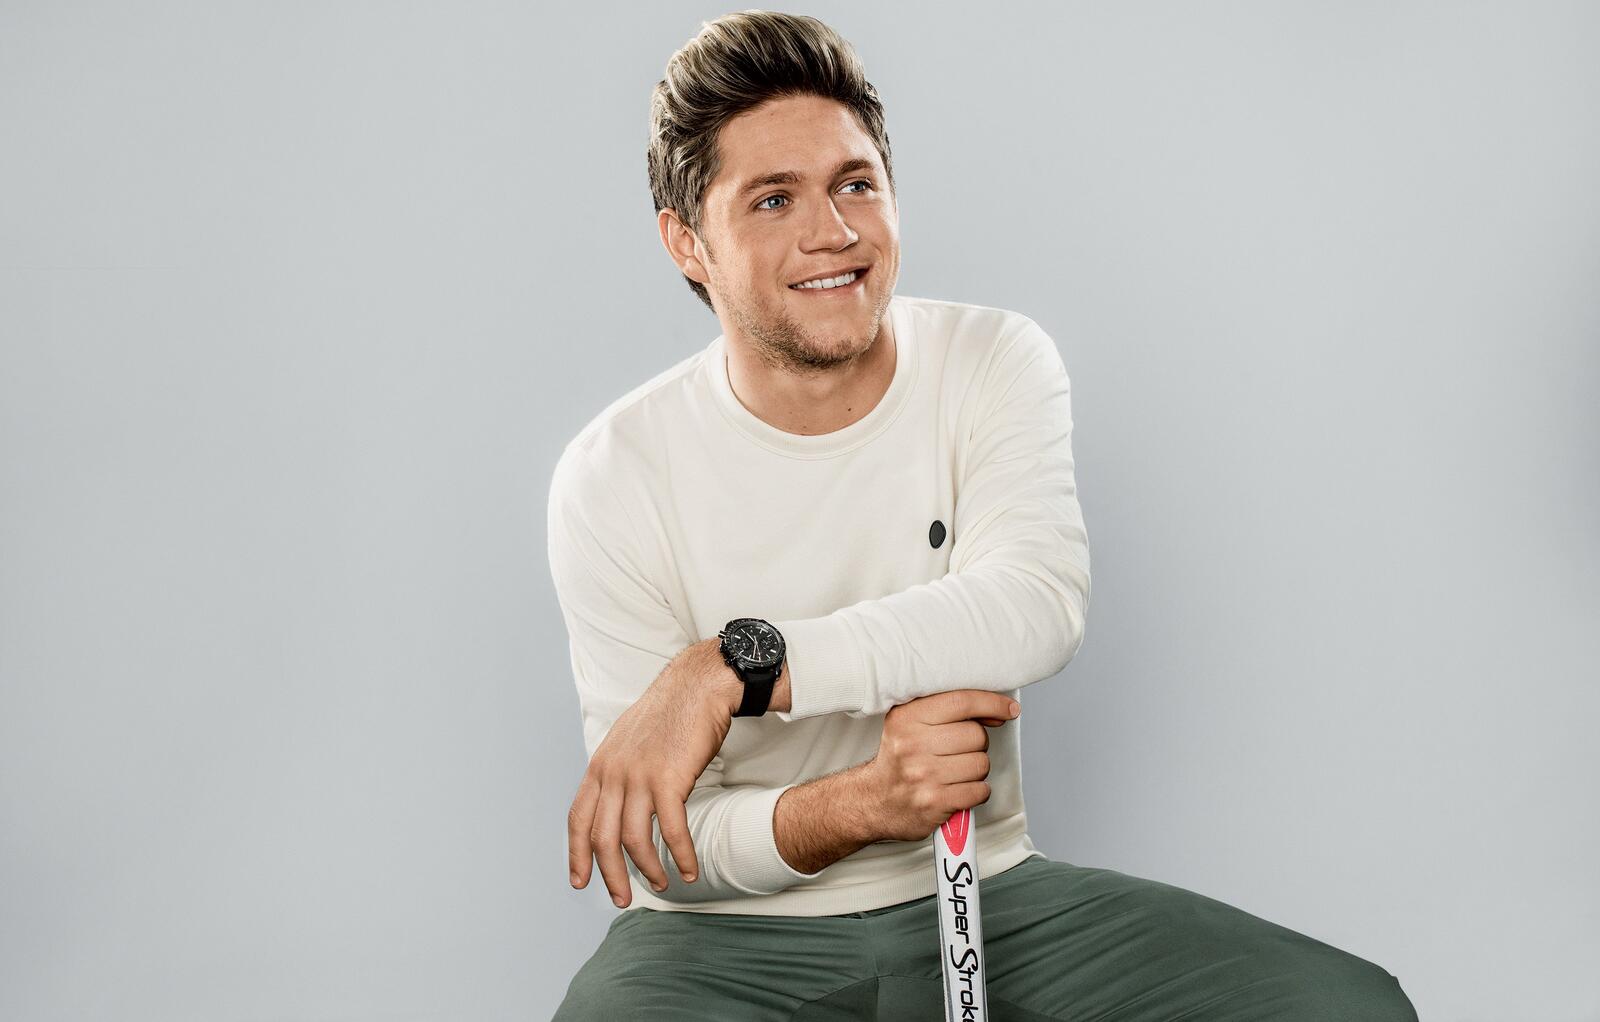 Wallpapers niall horan music the singer on the desktop